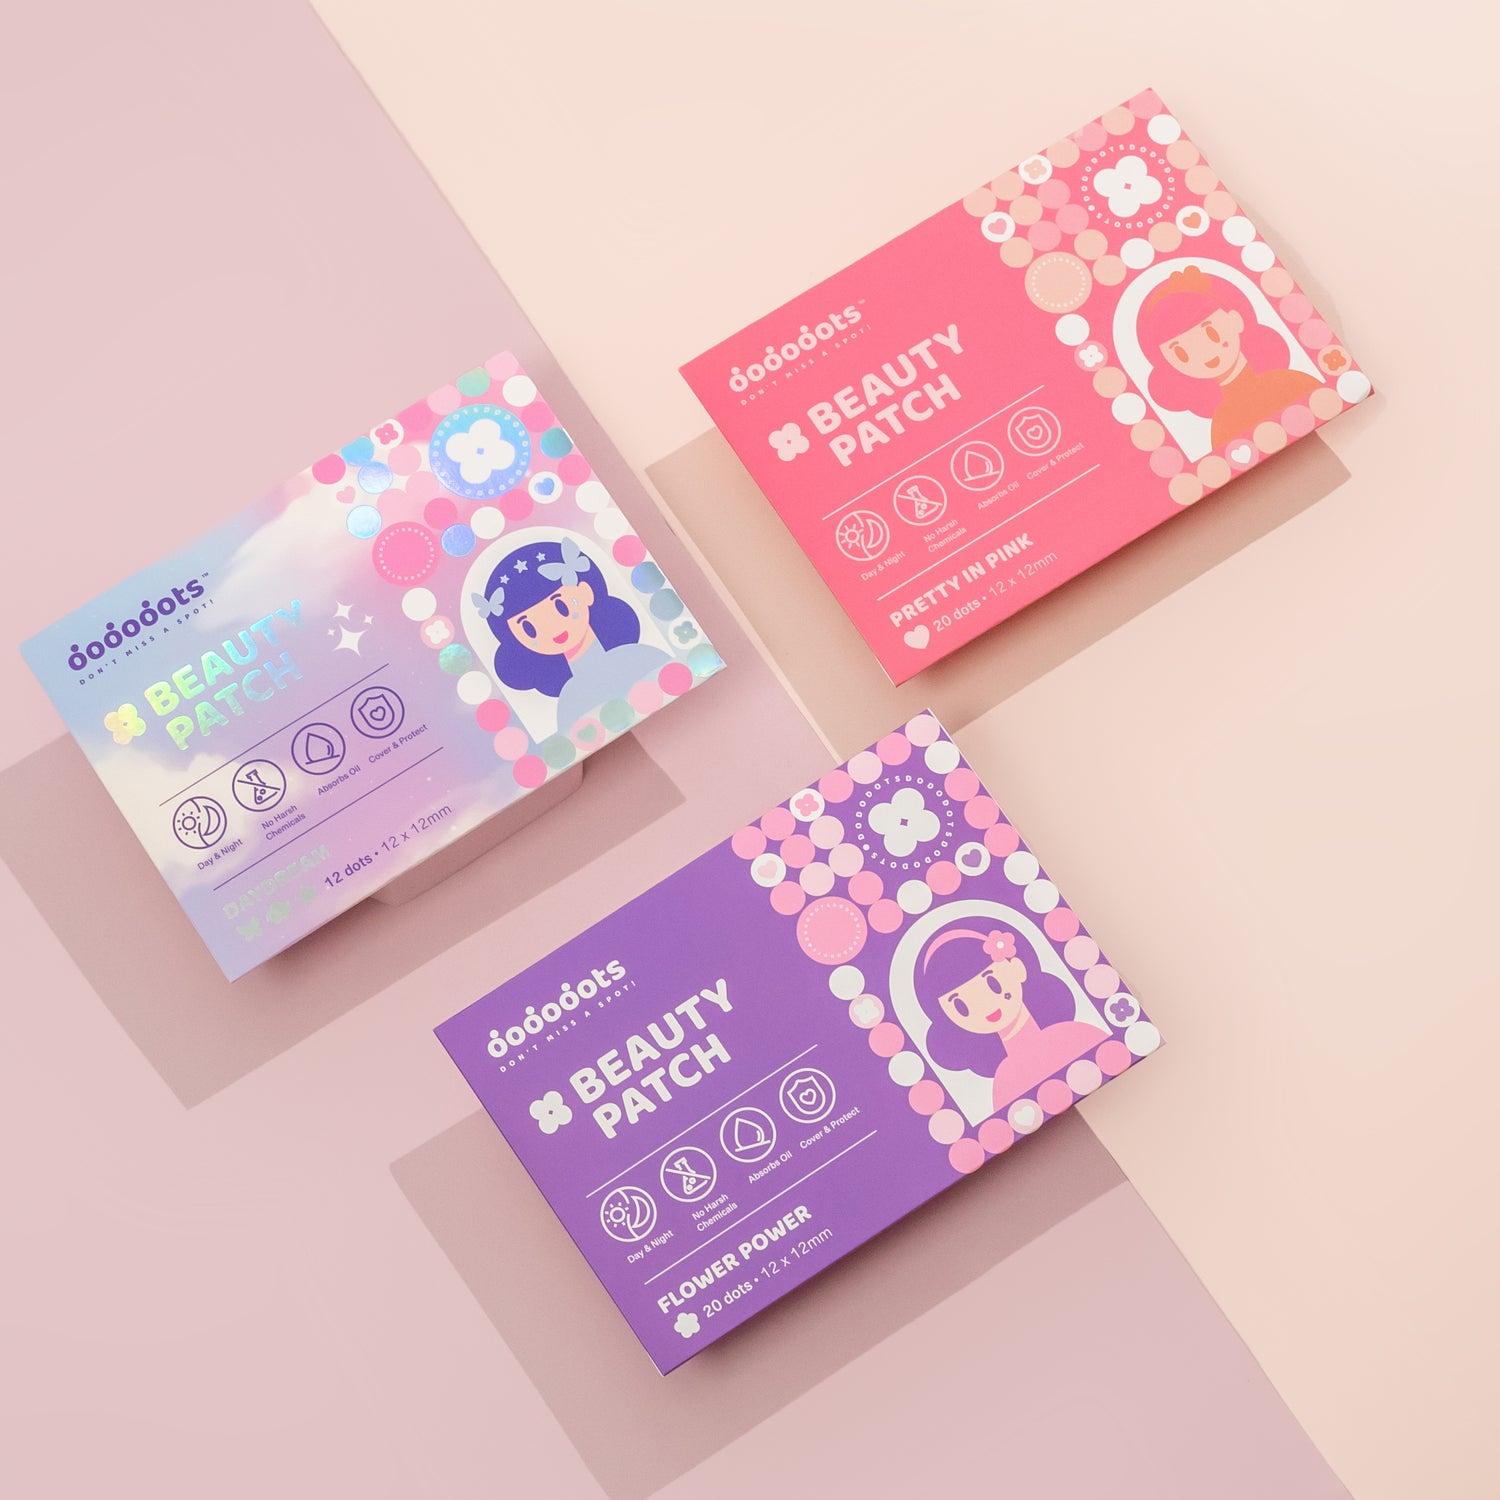 dododots beauty patch product variants